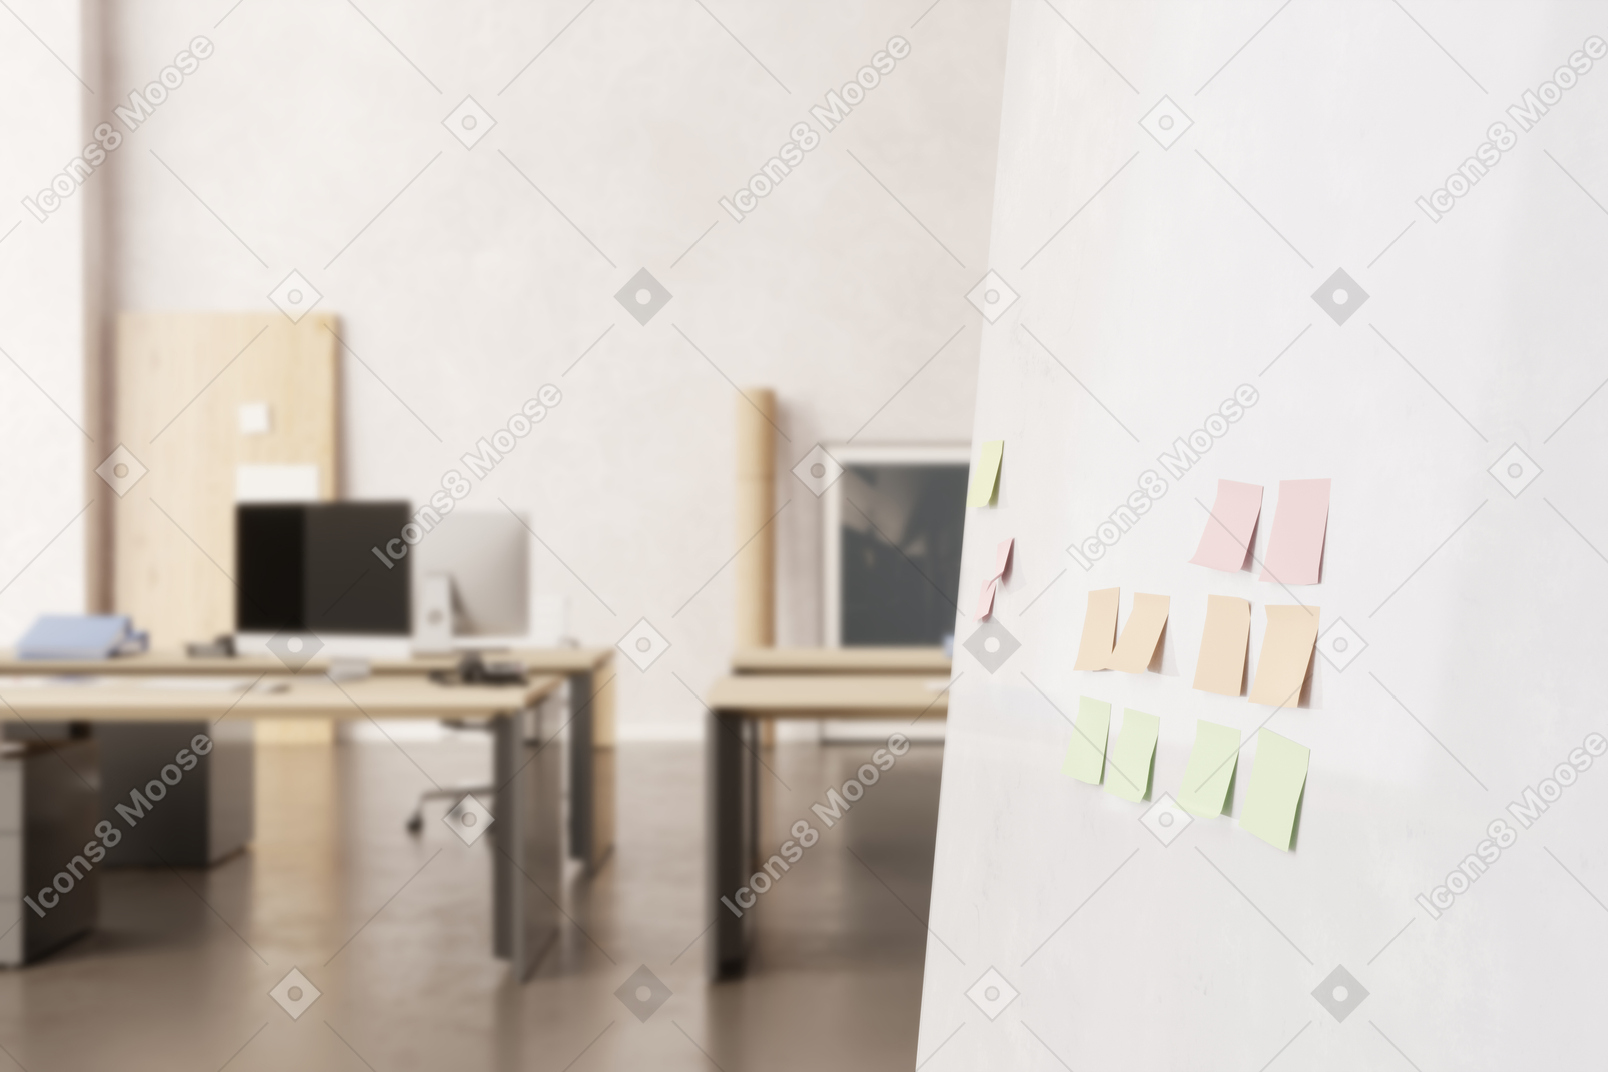 White wall with sticky notes and computer desks in the background